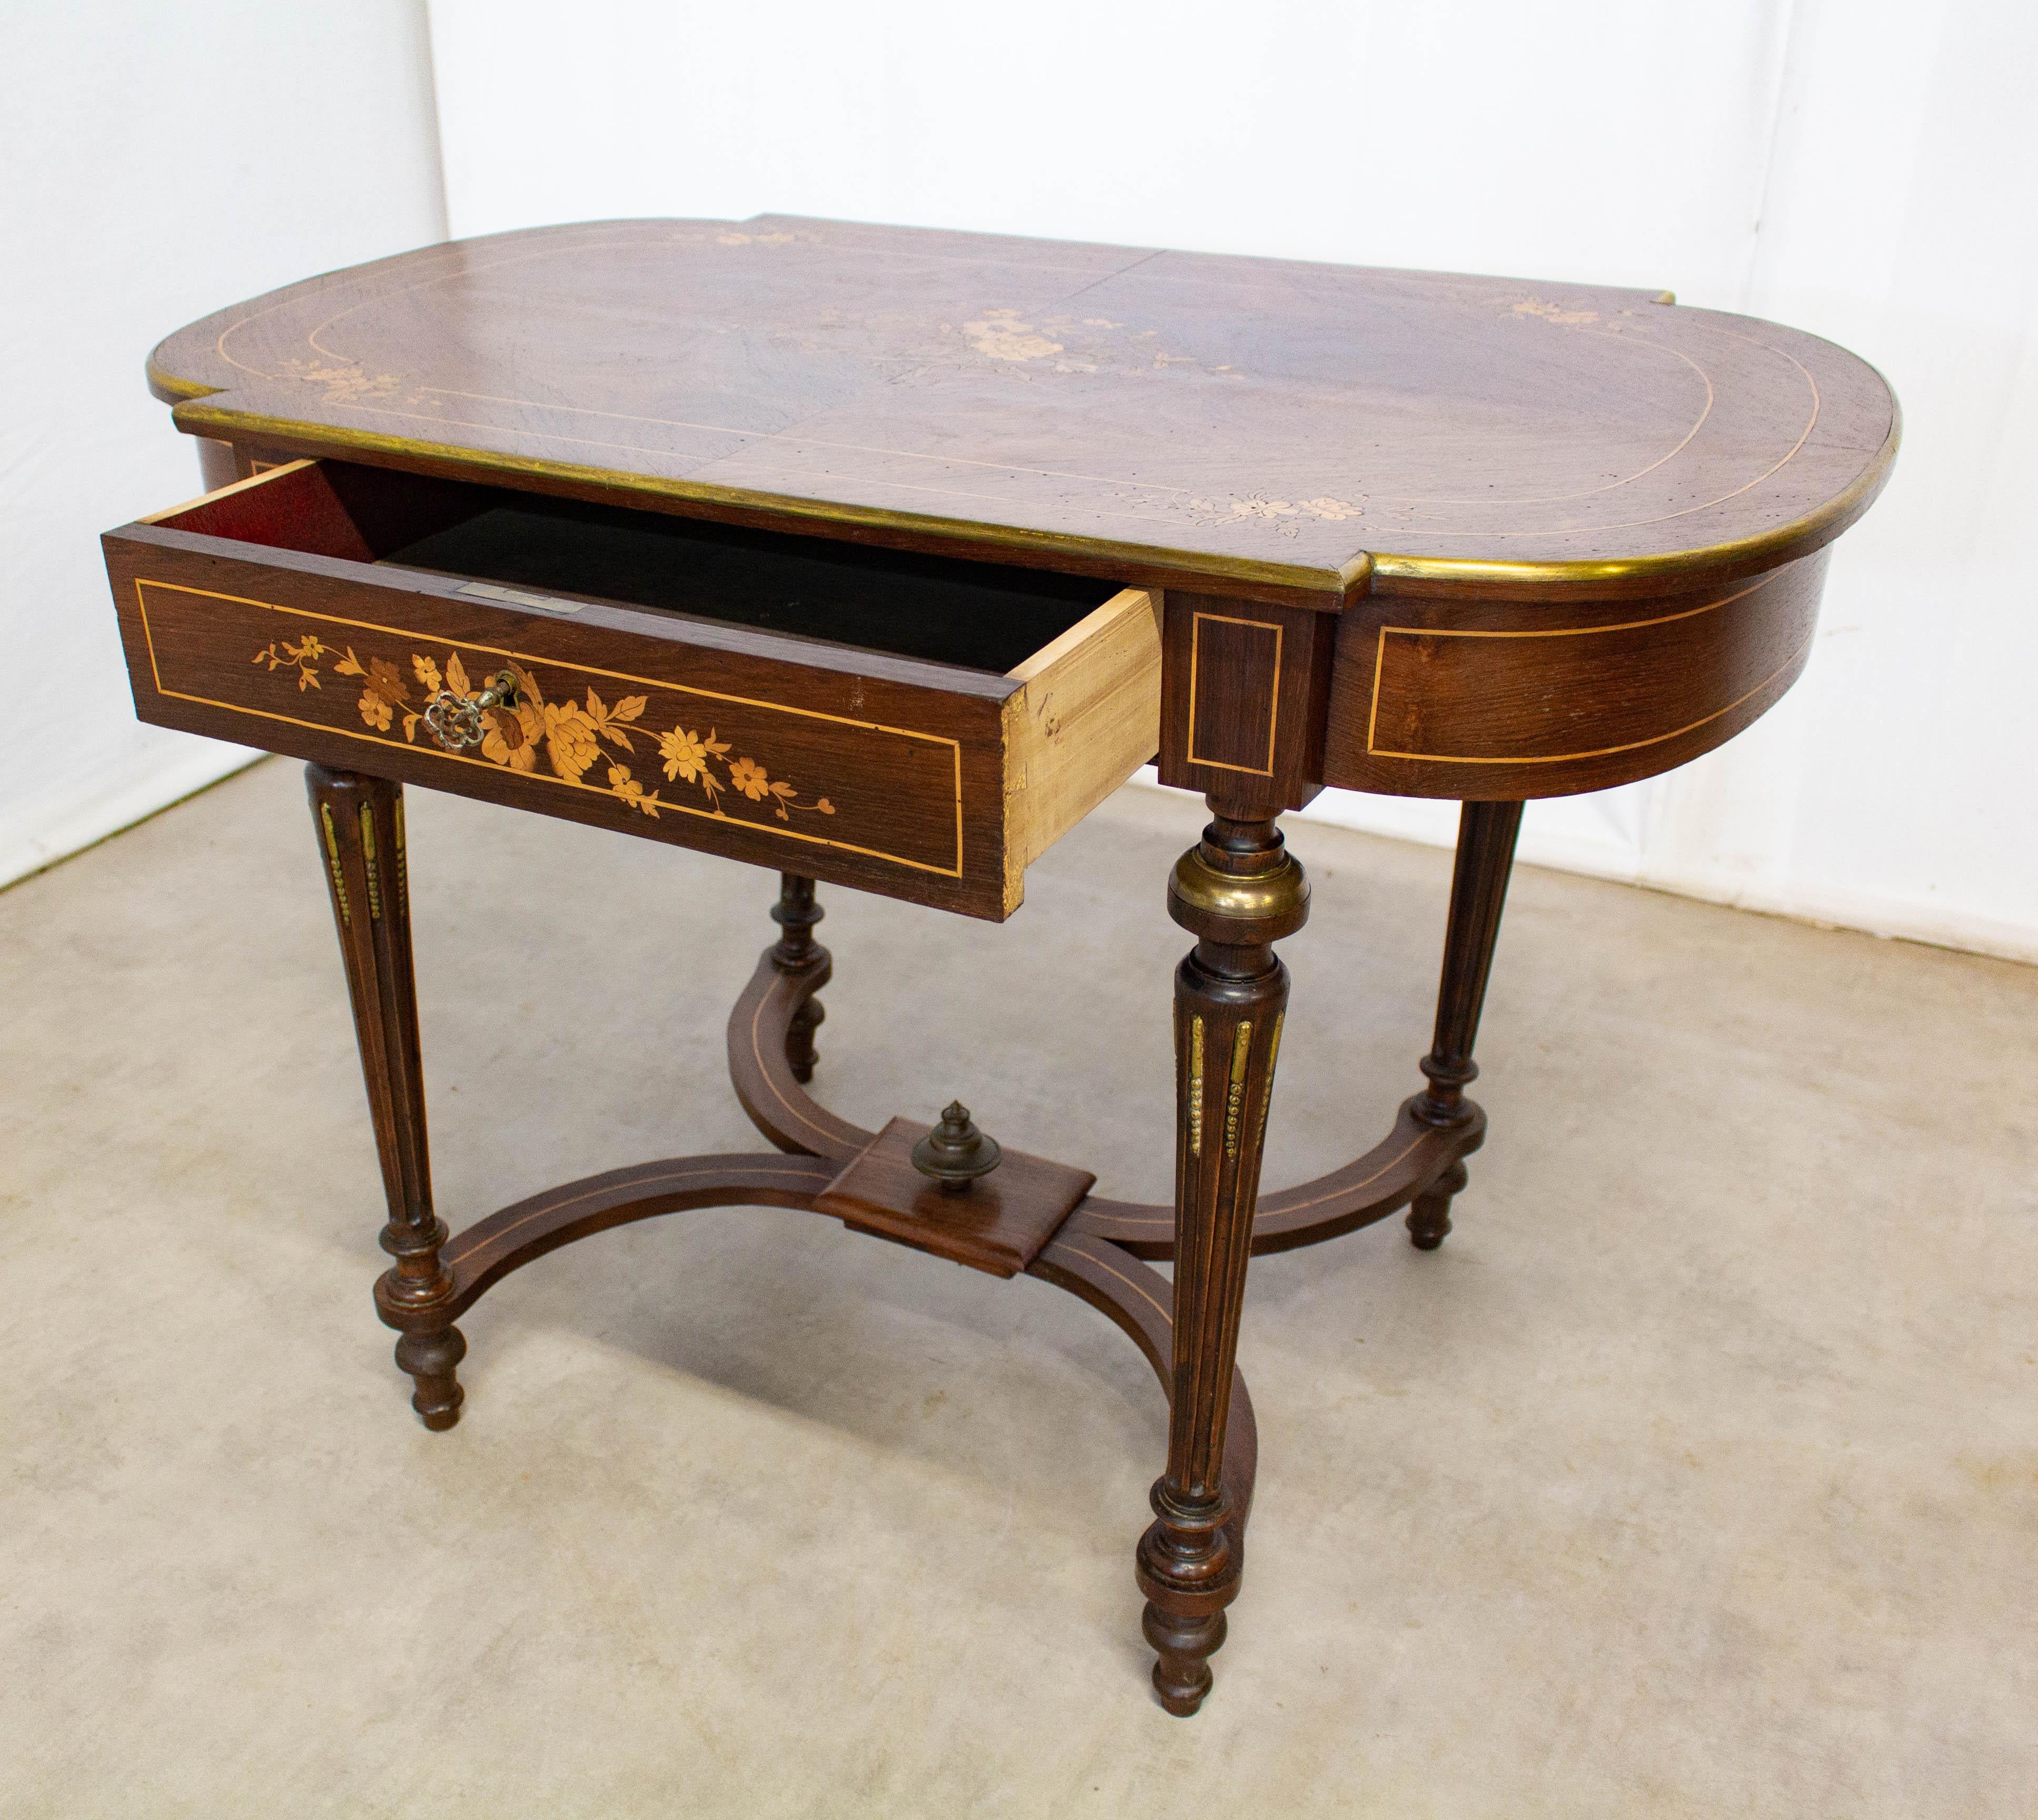 French Writing Table Louis XVI Style Floral Inlays, 19th Century 2